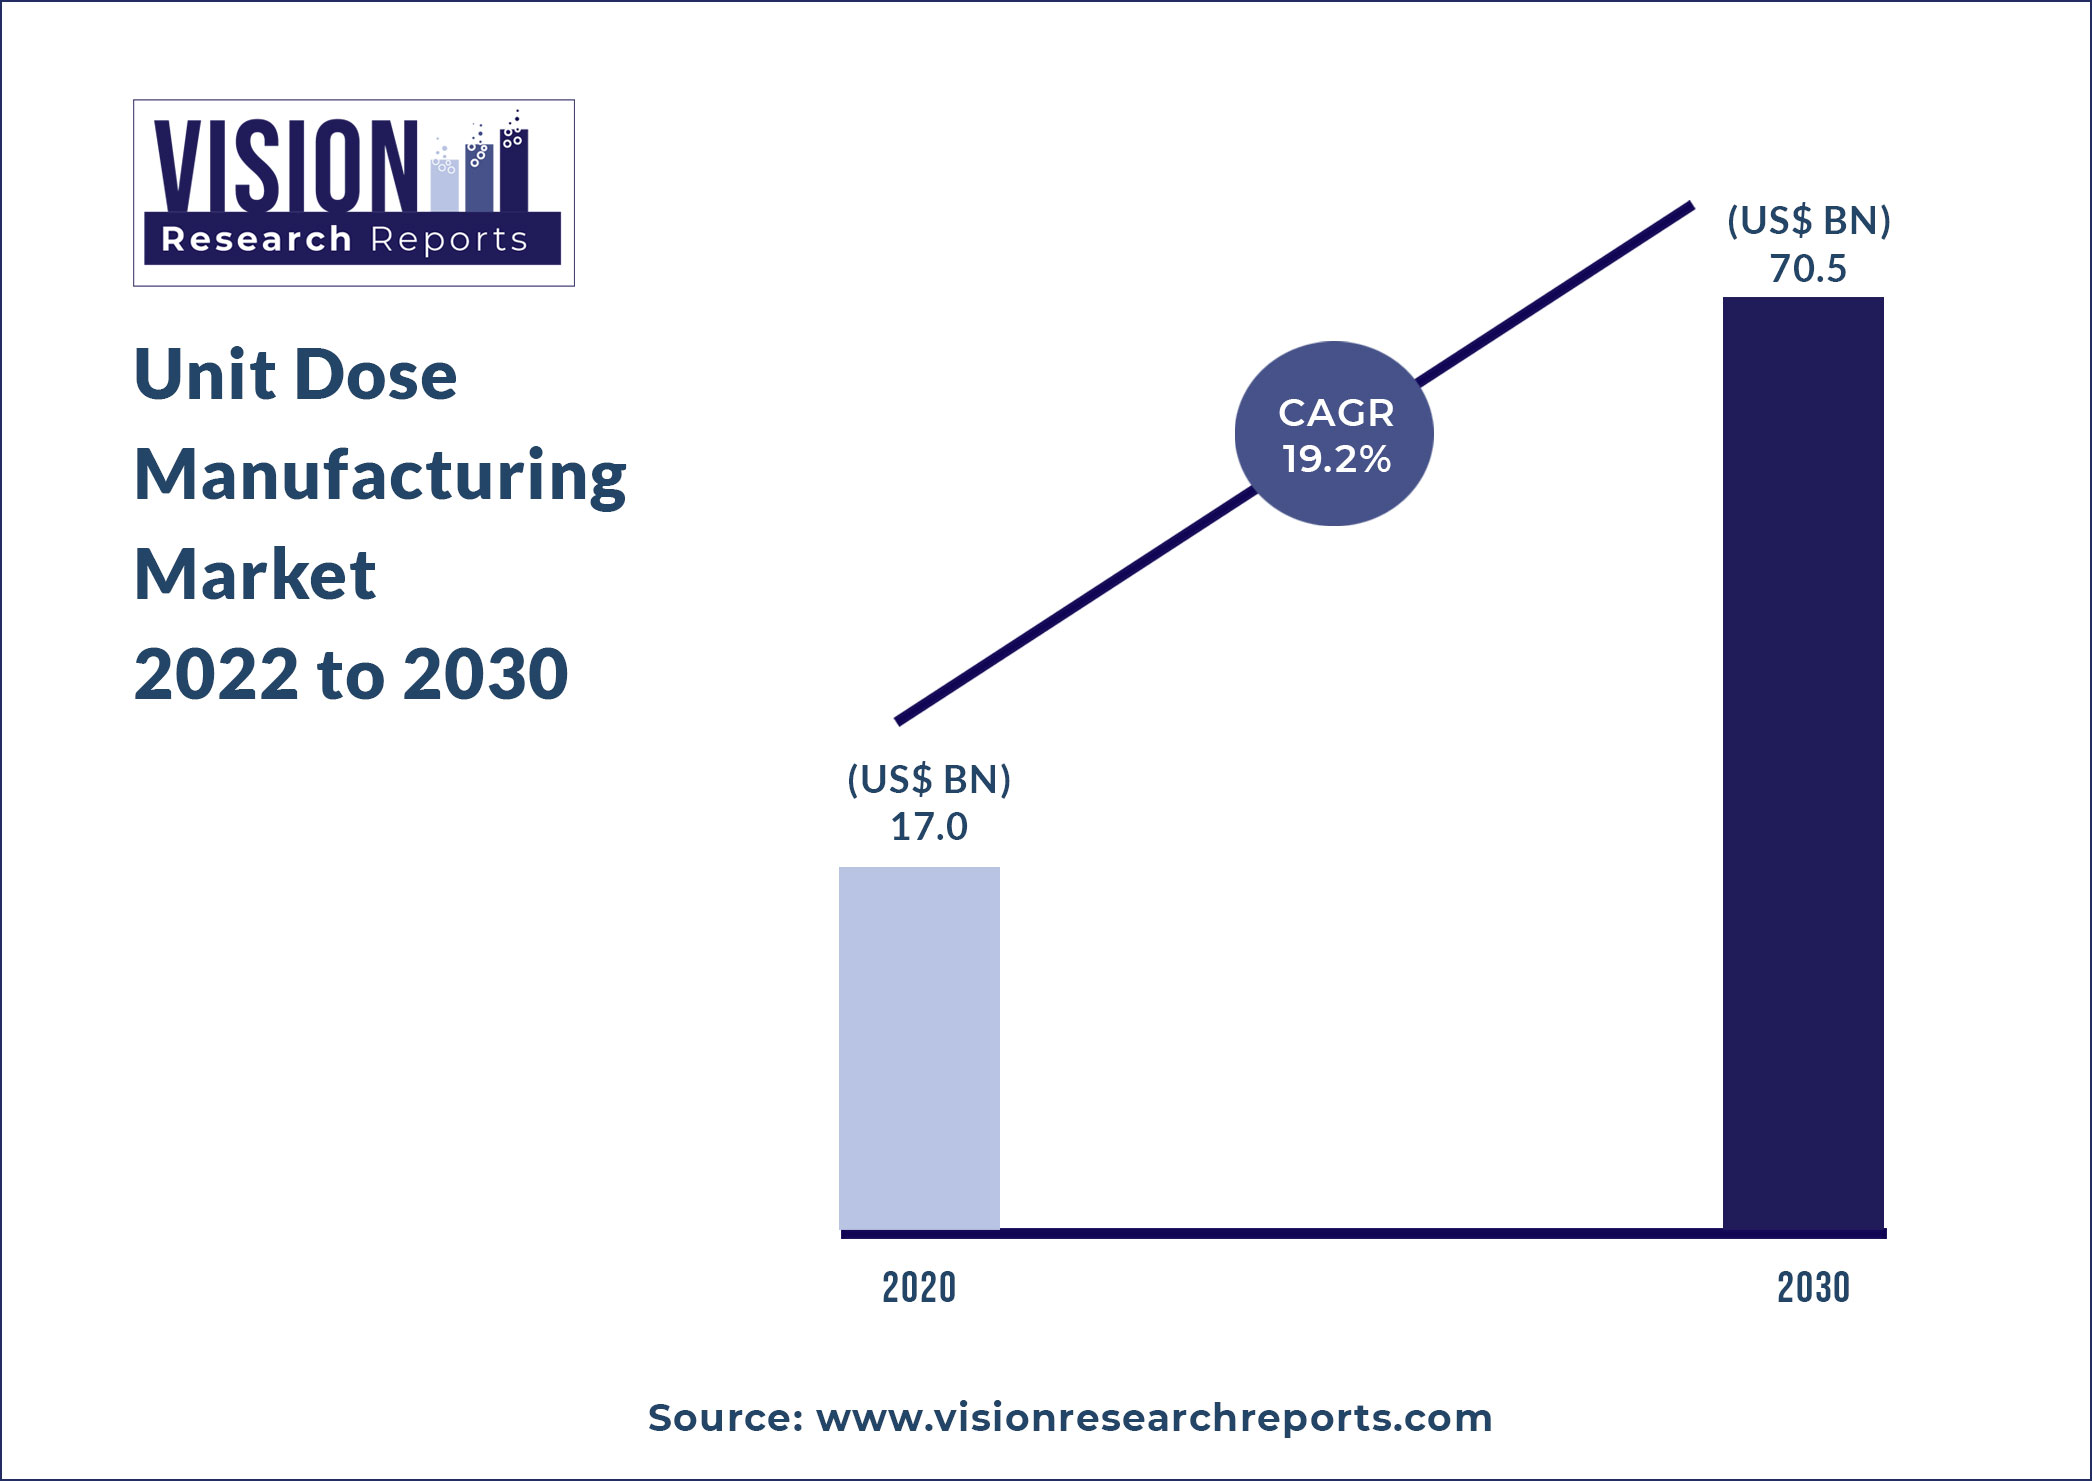 Unit Dose Manufacturing Market Size 2022 to 2030